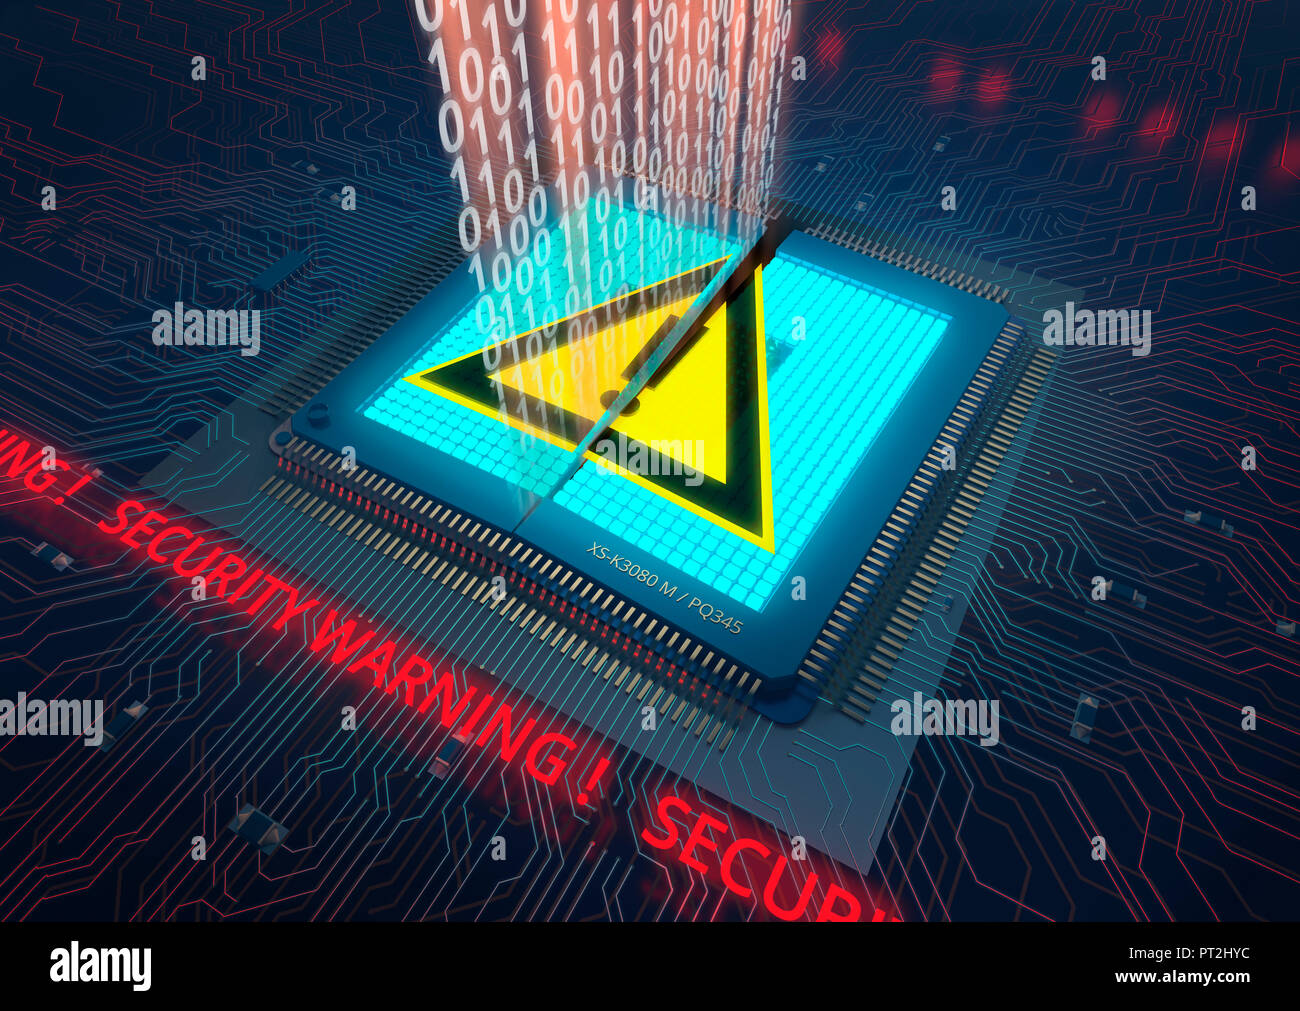 Broken microchip on circuit board with red lettering 'Security Warning', warning sign and stylized data stream Stock Photo